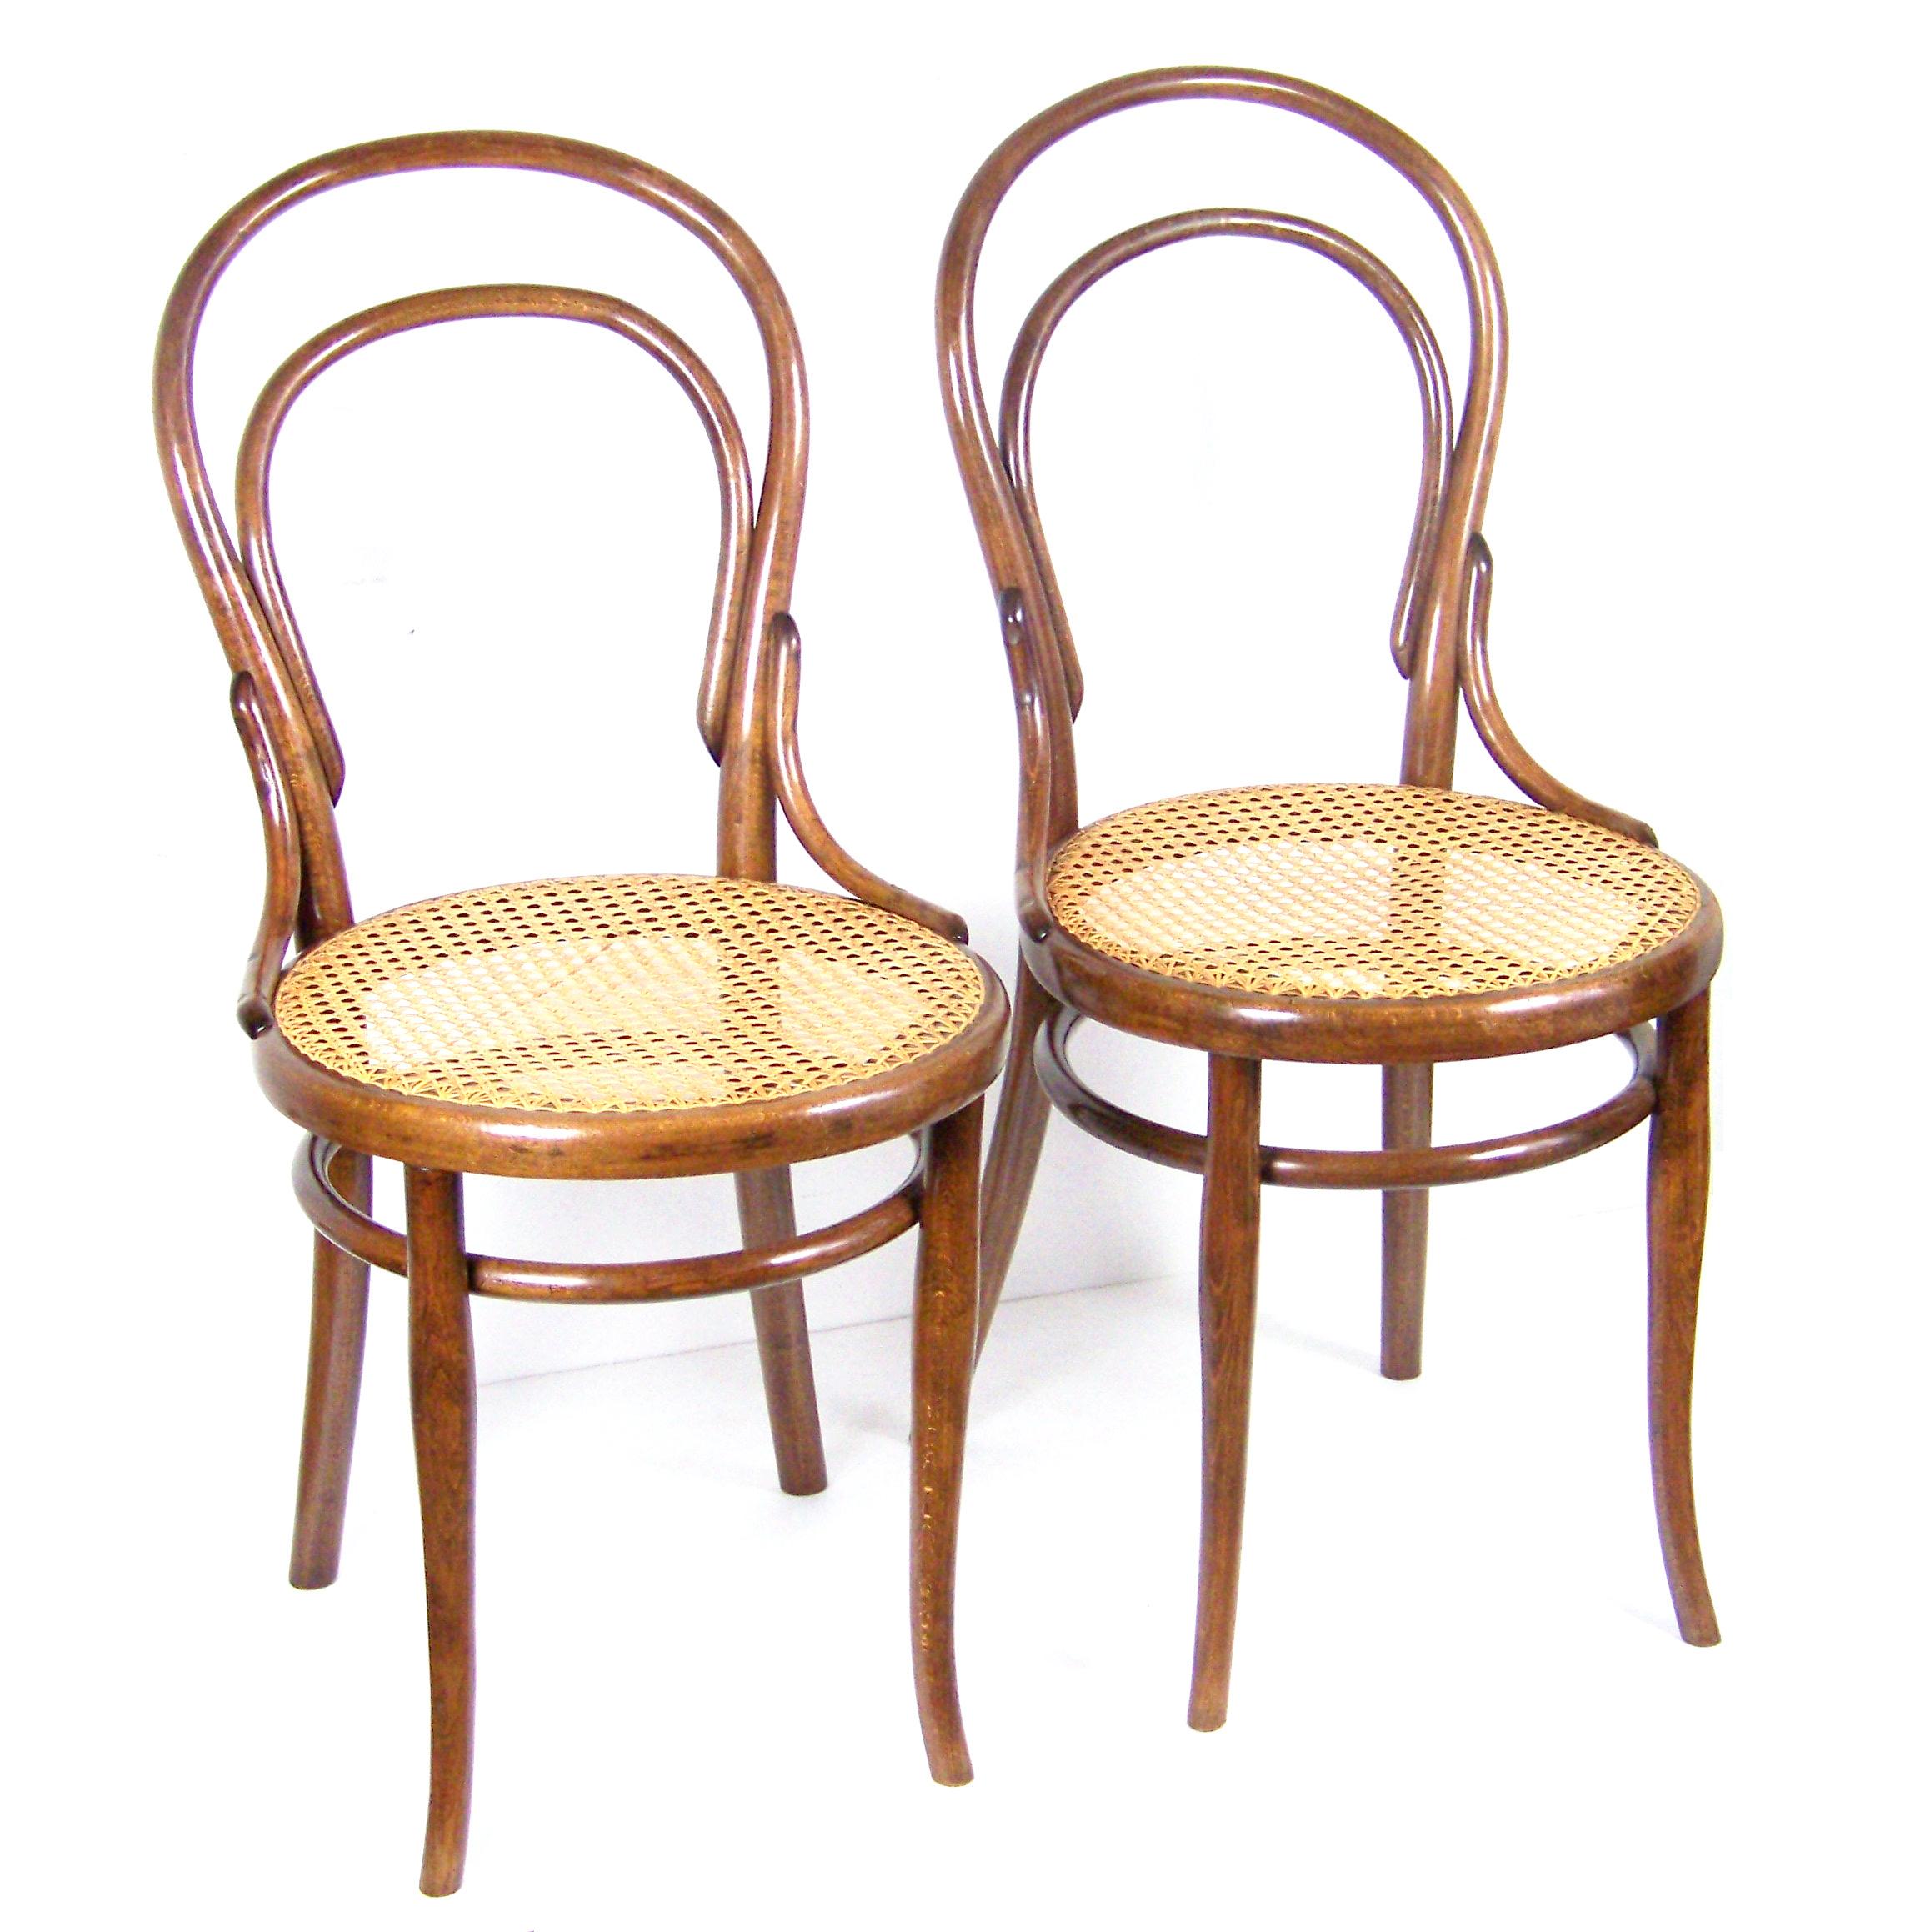 Manufactured in Austria by the Gebrüder Thonet company after year 1900. Restored in the recent past, including a new string of seats and shellac polish, so they are in very good condition. Perfectly cleaned and re-polished with shellac polish.